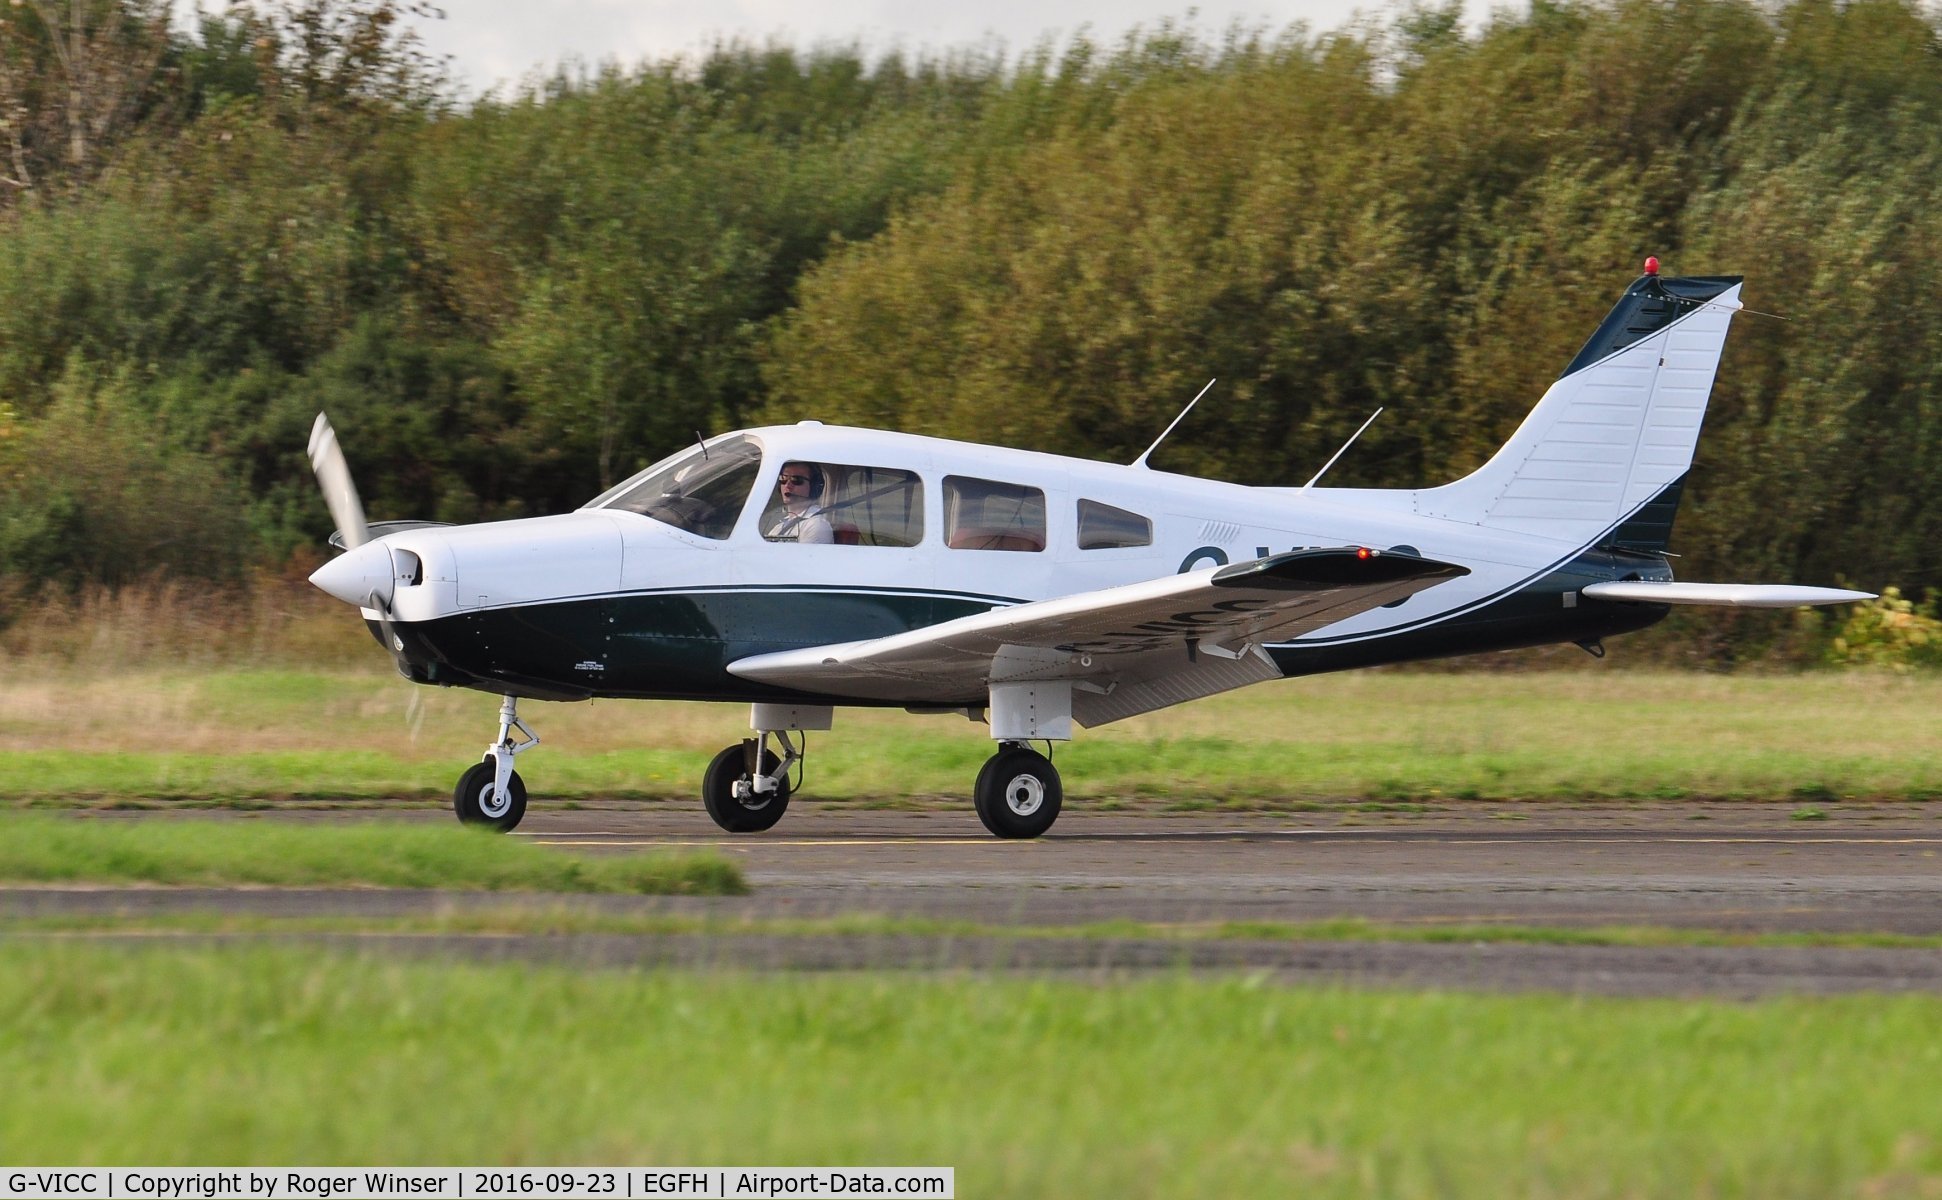 G-VICC, 1979 Piper PA-28-161 Cherokee Warrior II C/N 28-7916317, Warrior II in a new colour scheme for 2016.